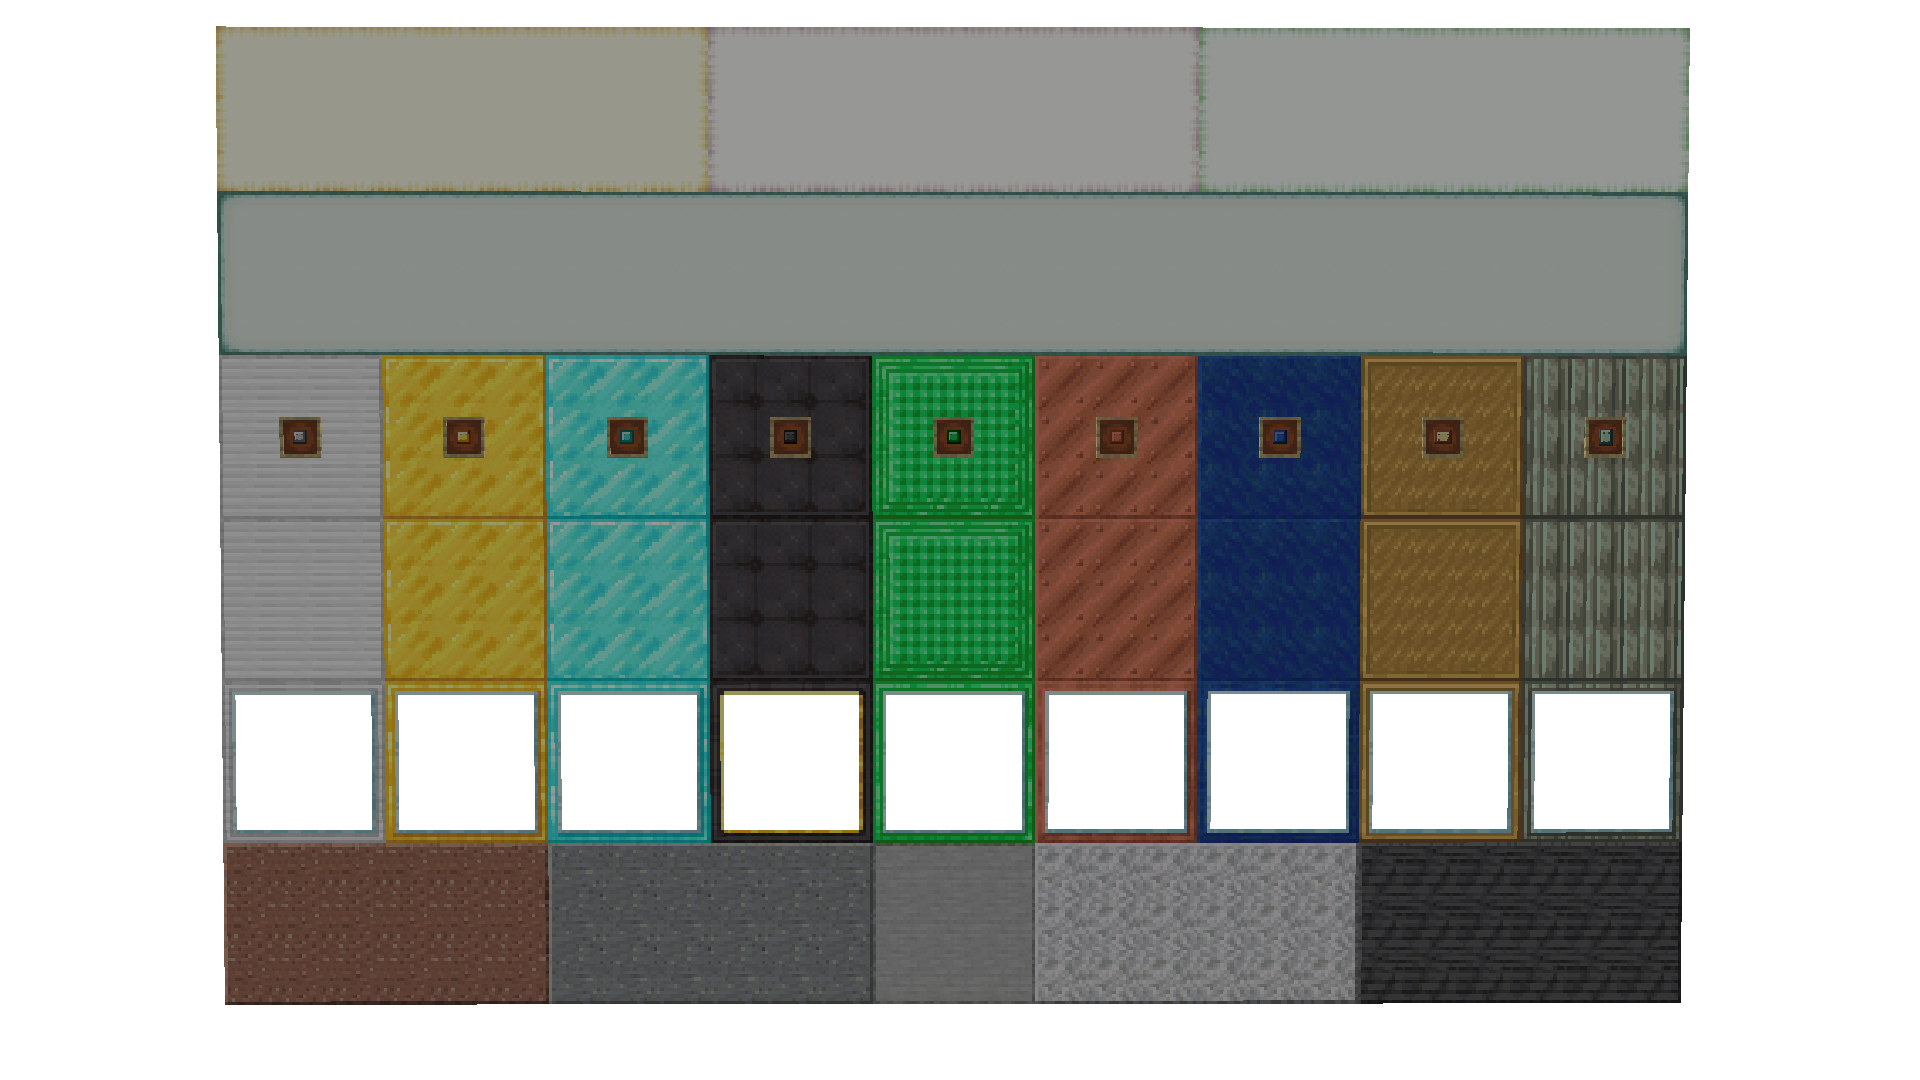 Modded Mine Blocks with Minecraft textures (link in comments) : r/MineBlocks